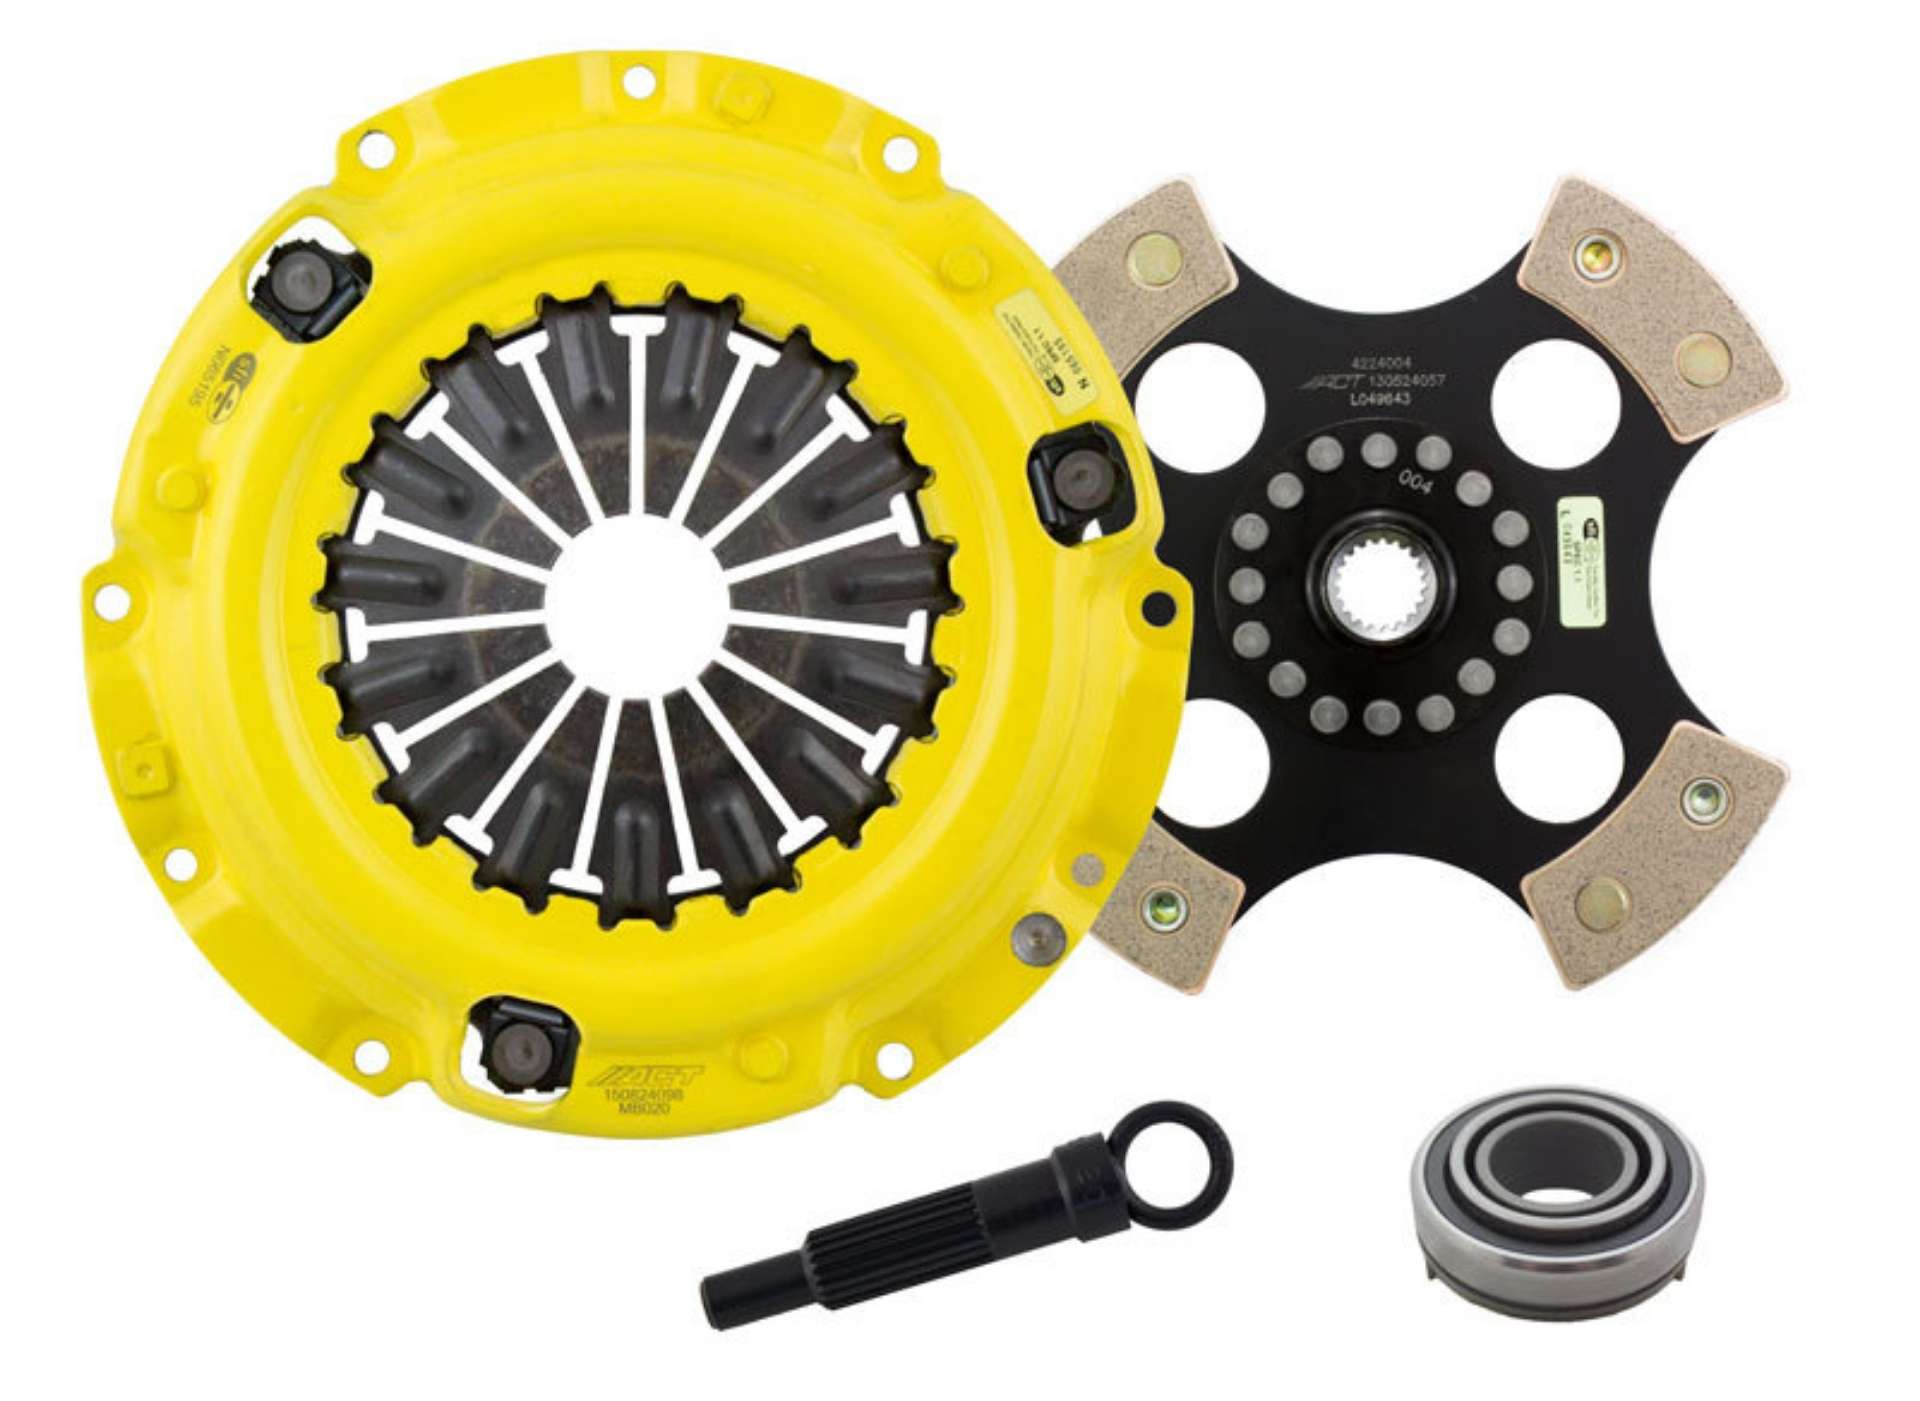 Picture of ACT 2005 Mitsubishi Lancer HD-Race Rigid 4 Pad Clutch Kit